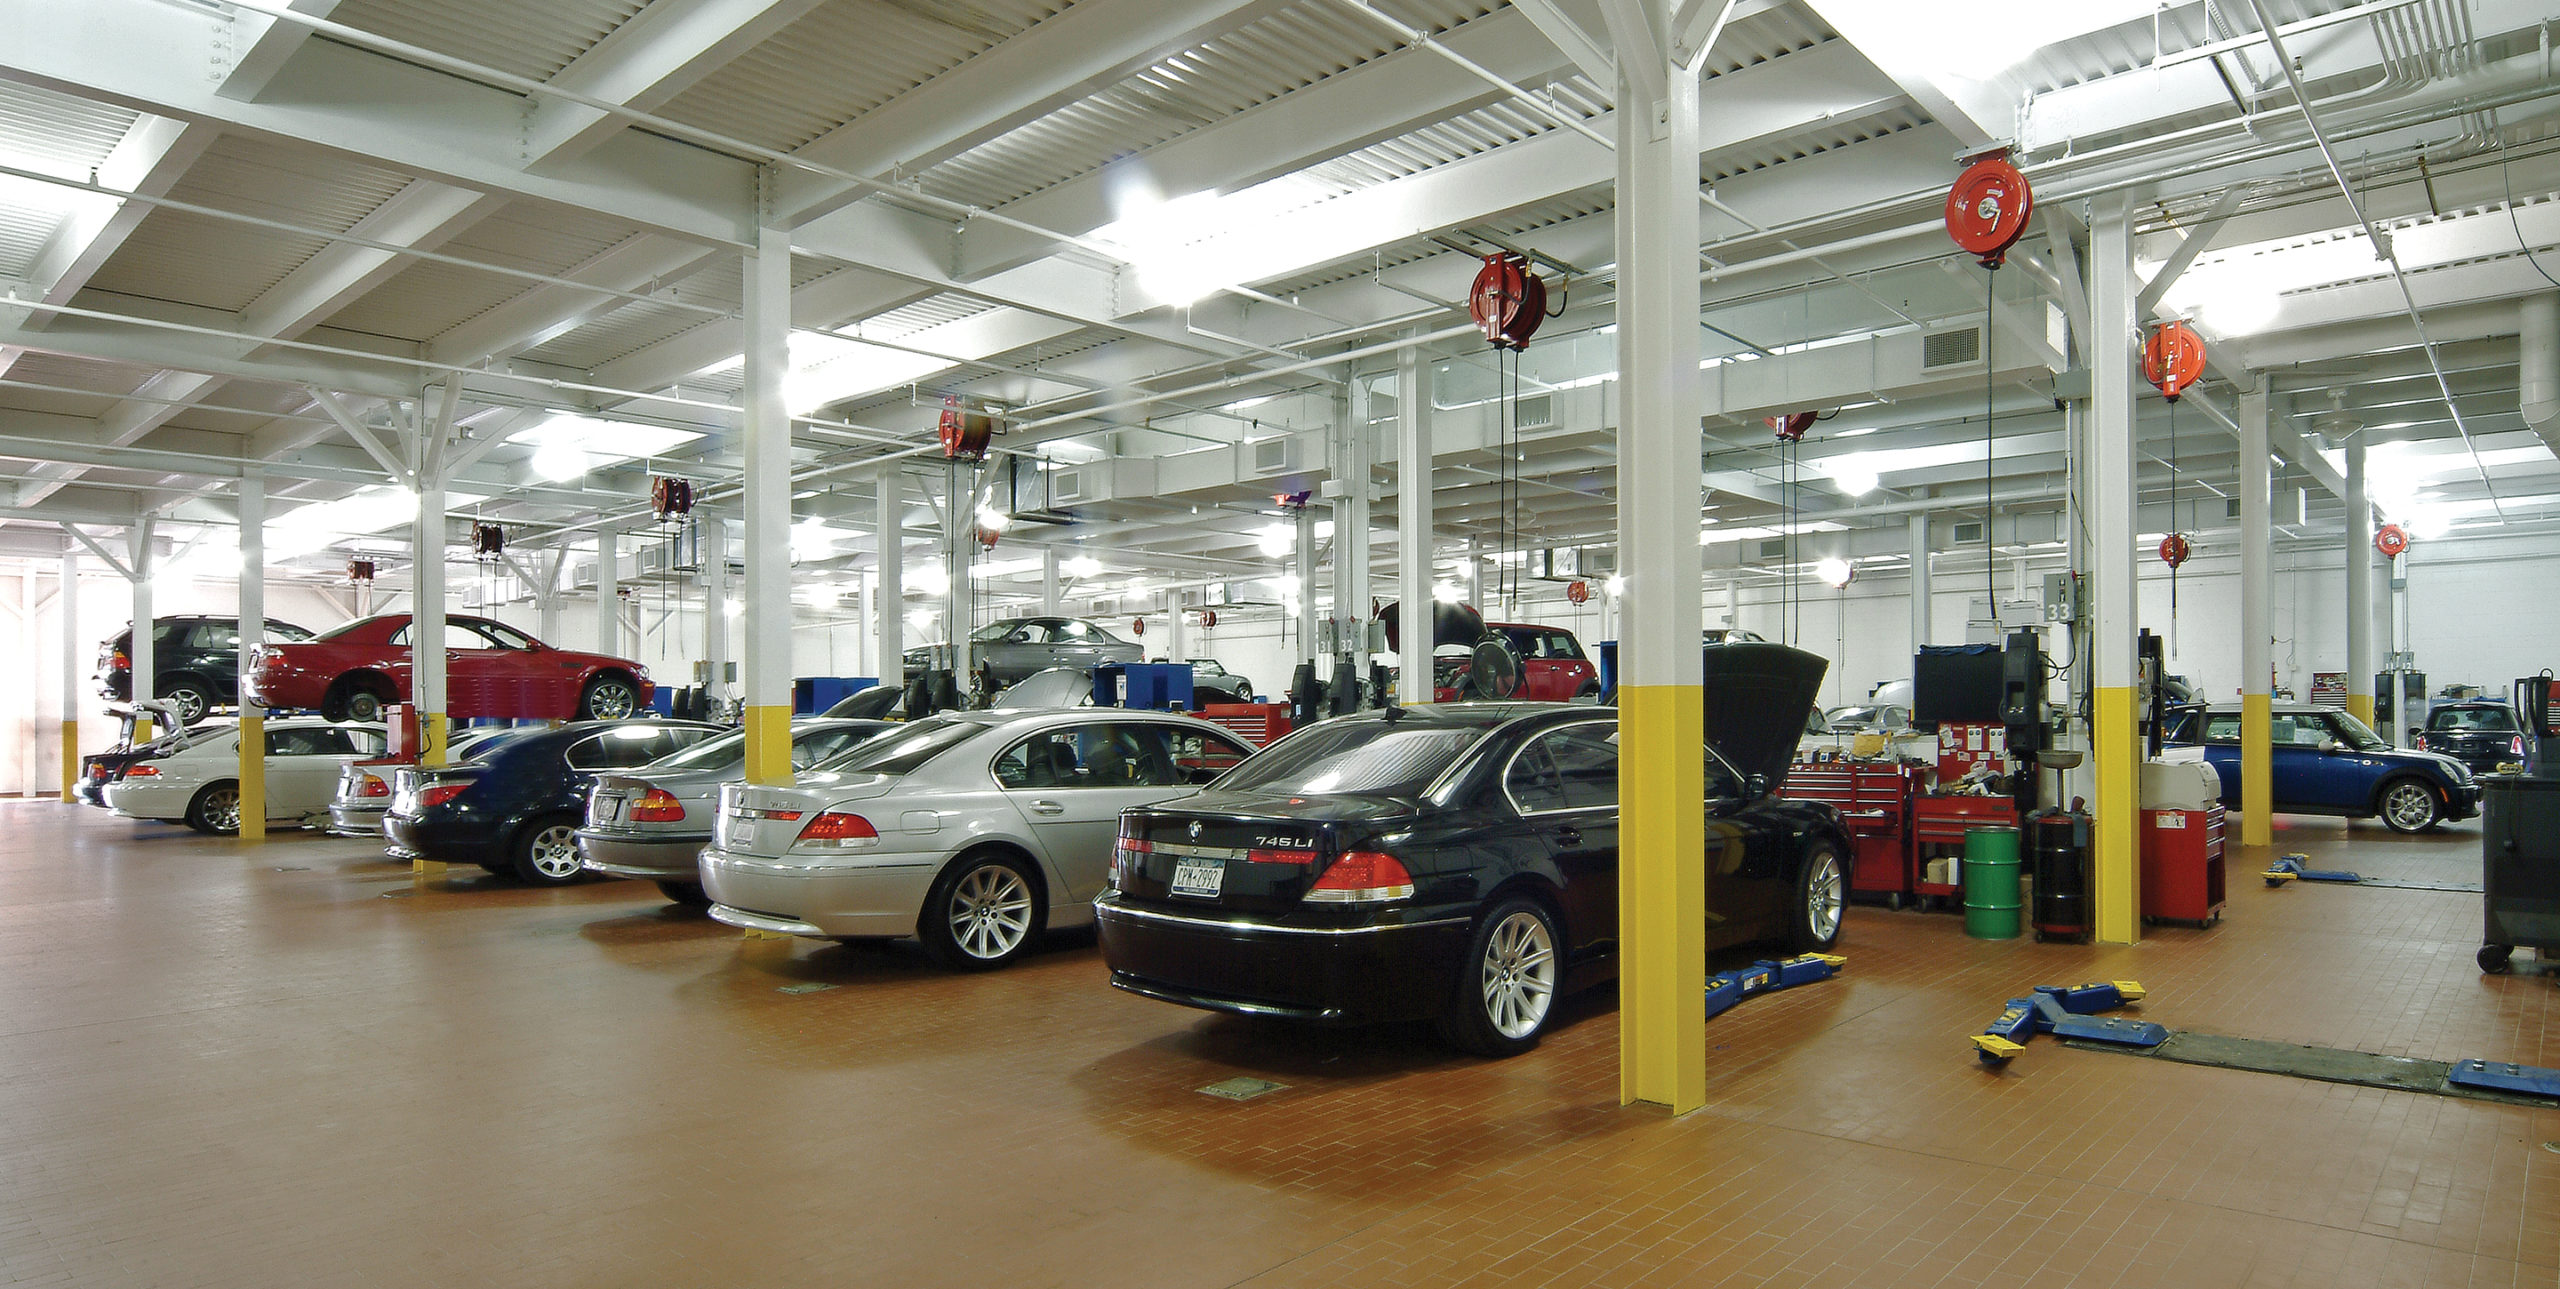 Hassel BMW warehouse area in Freeport